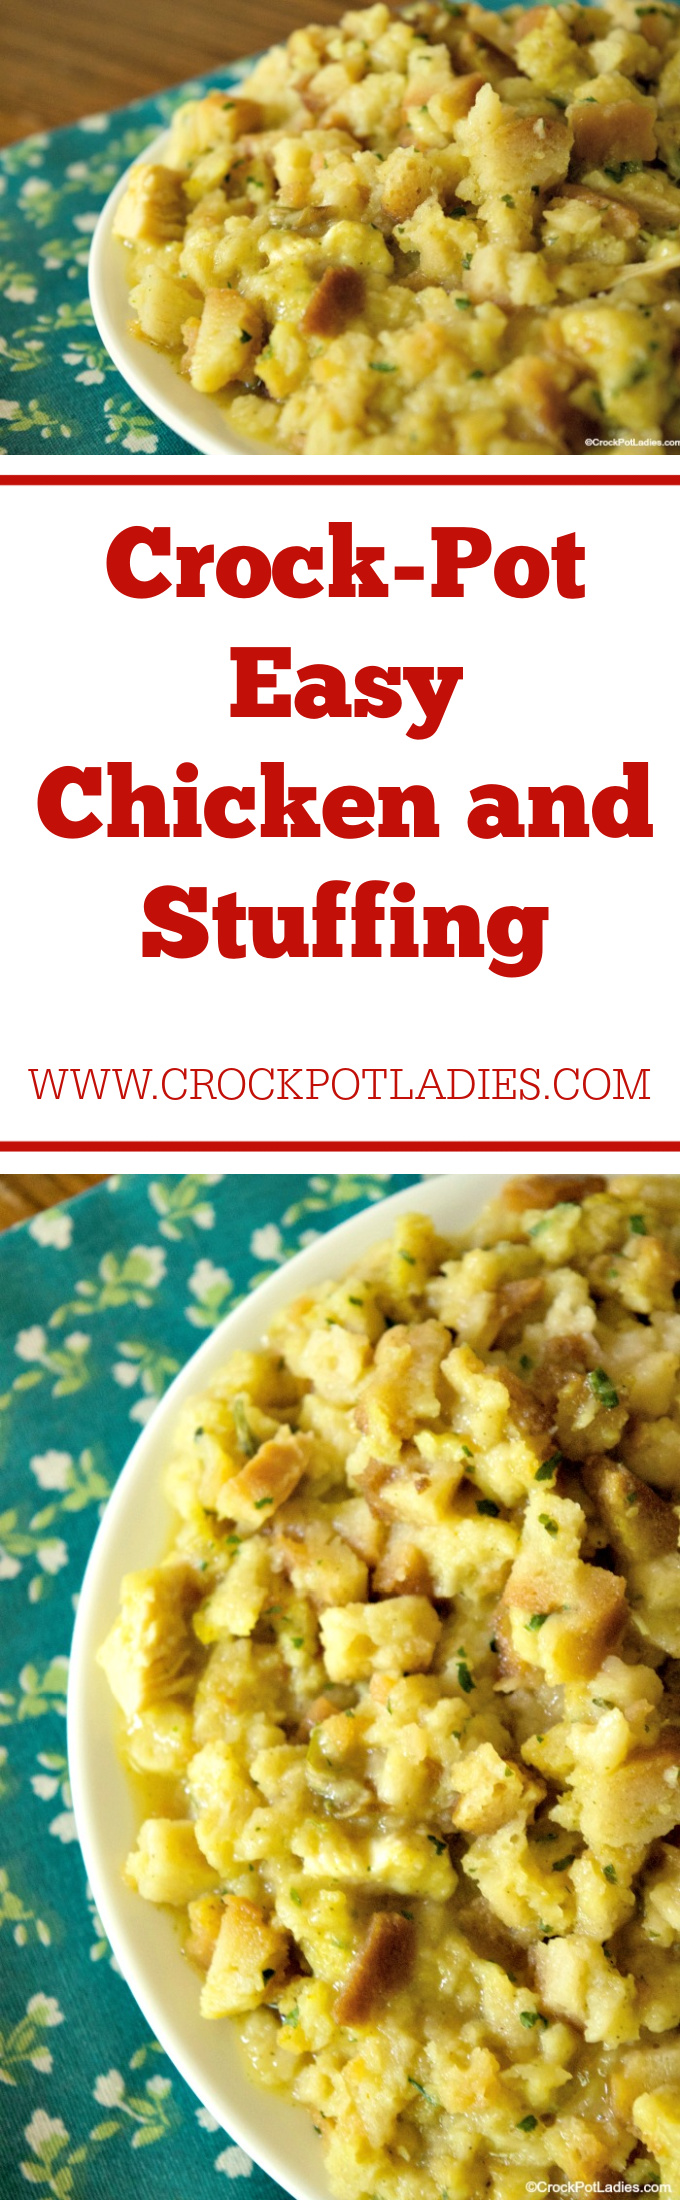 Crock-Pot Easy Chicken and Stuffing